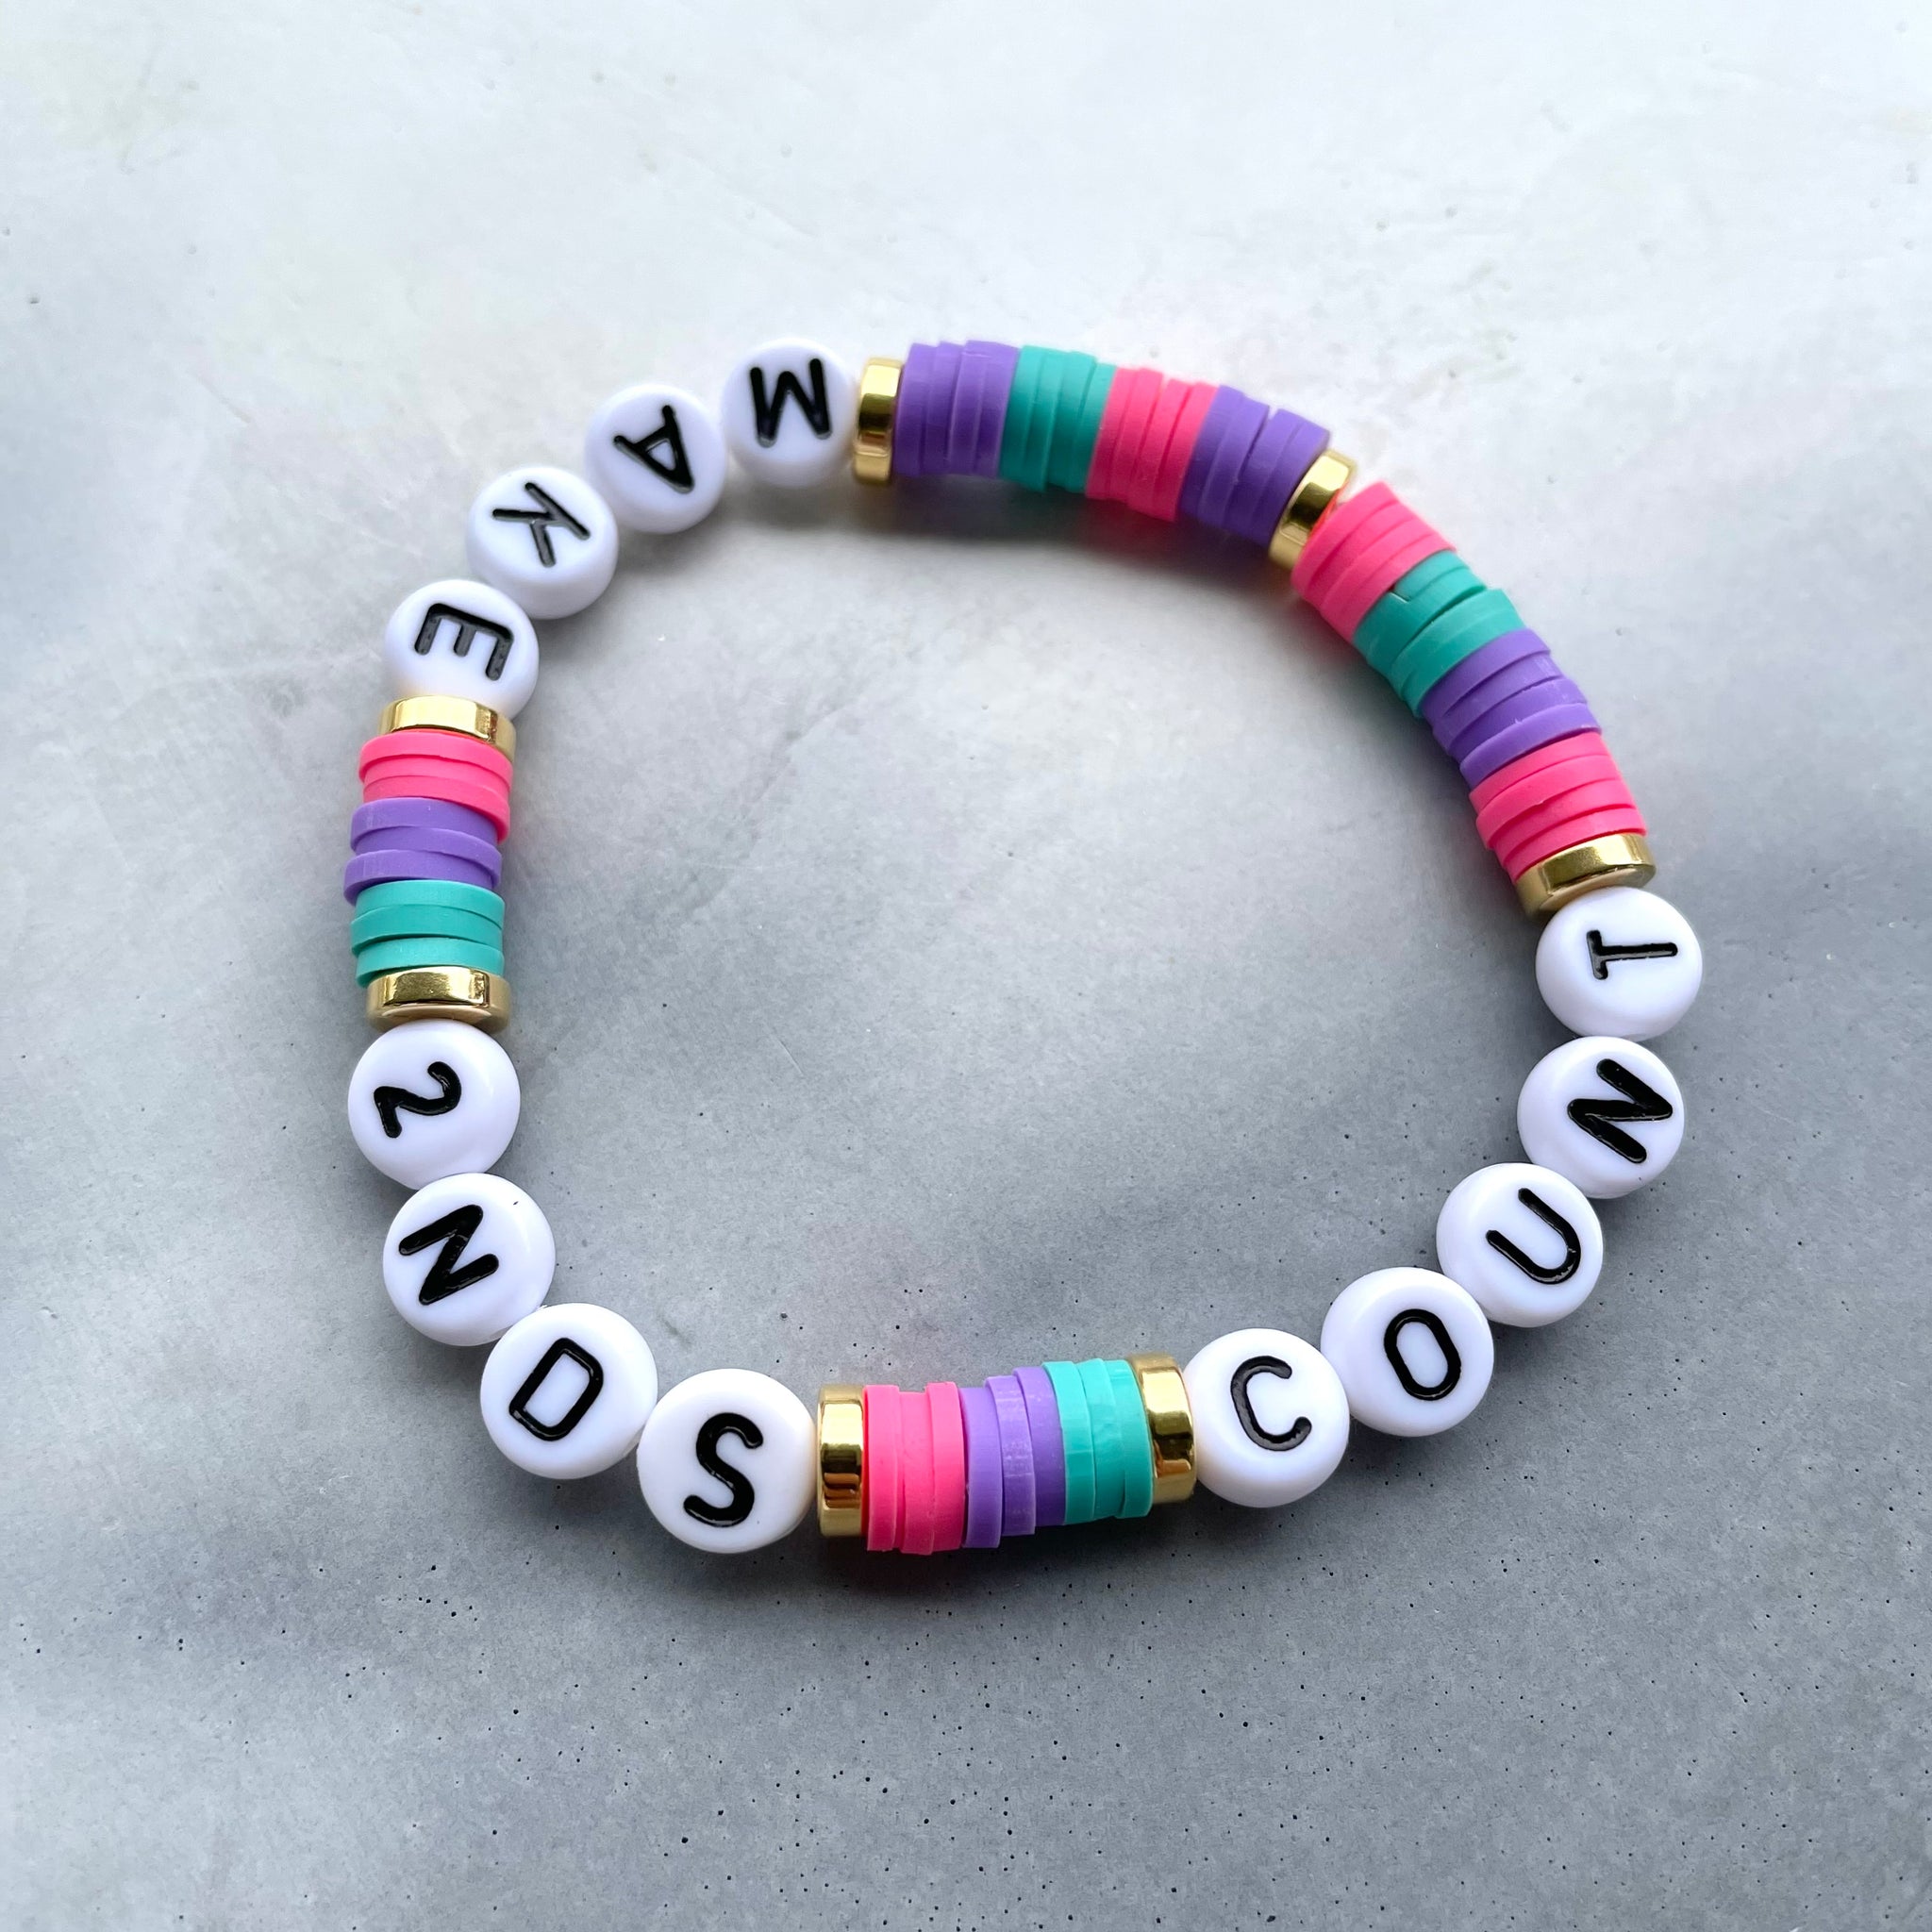 Make Seconds Count Charity Bracelet